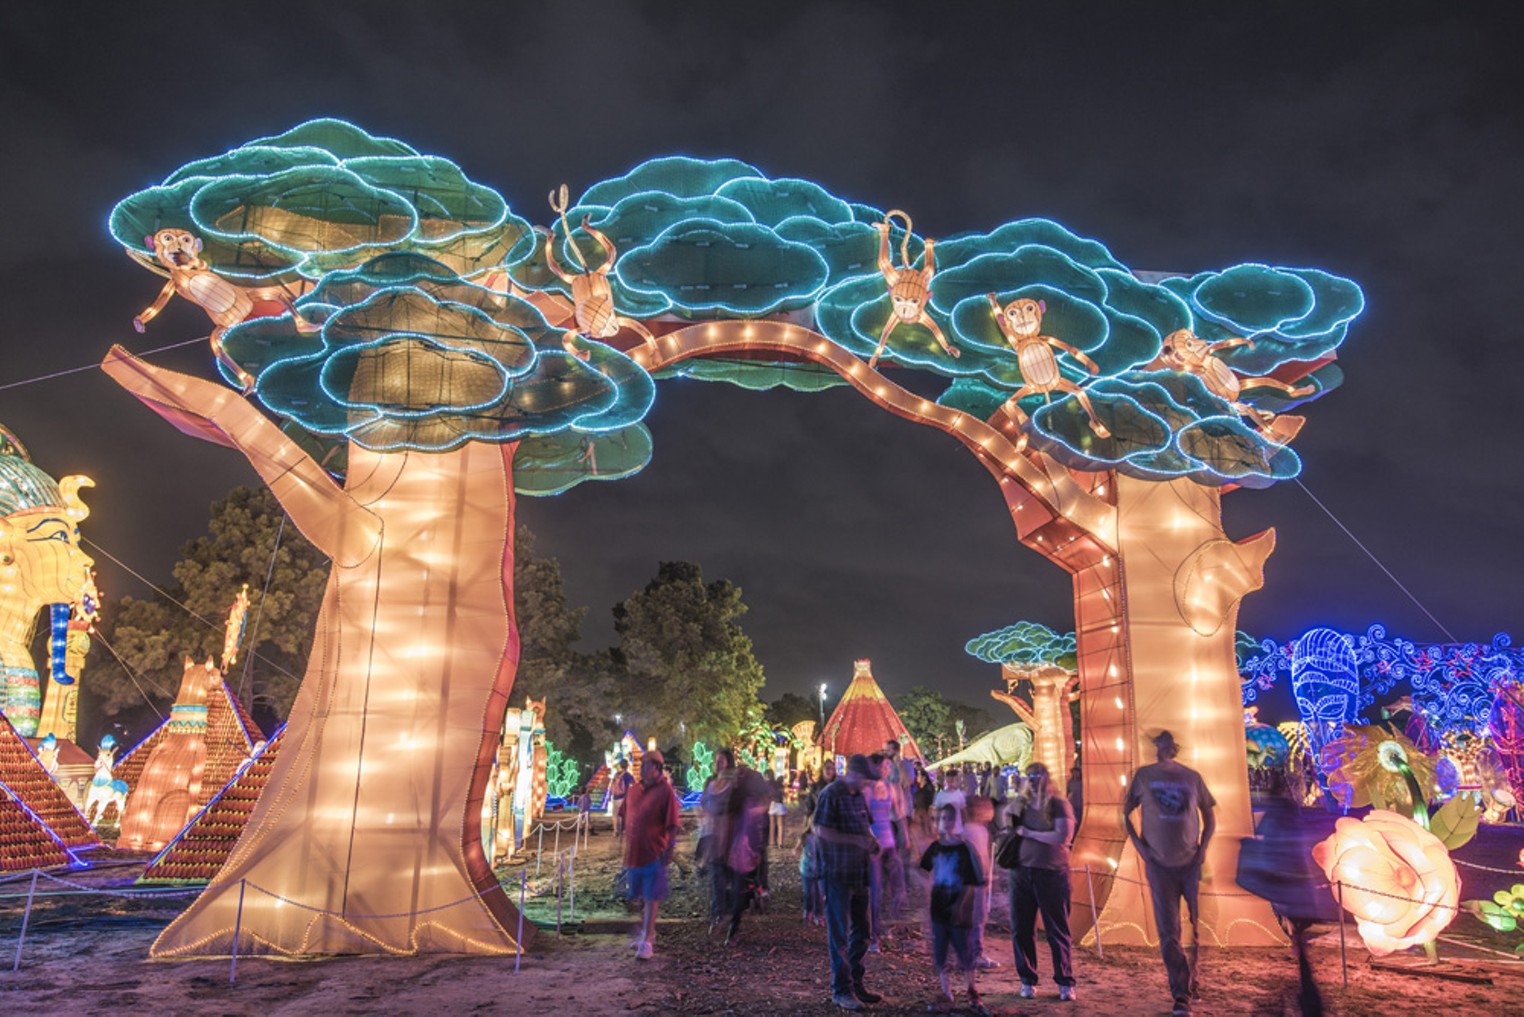 Magical Winter Lights Is A MustSee Holiday Treat Houston Houston